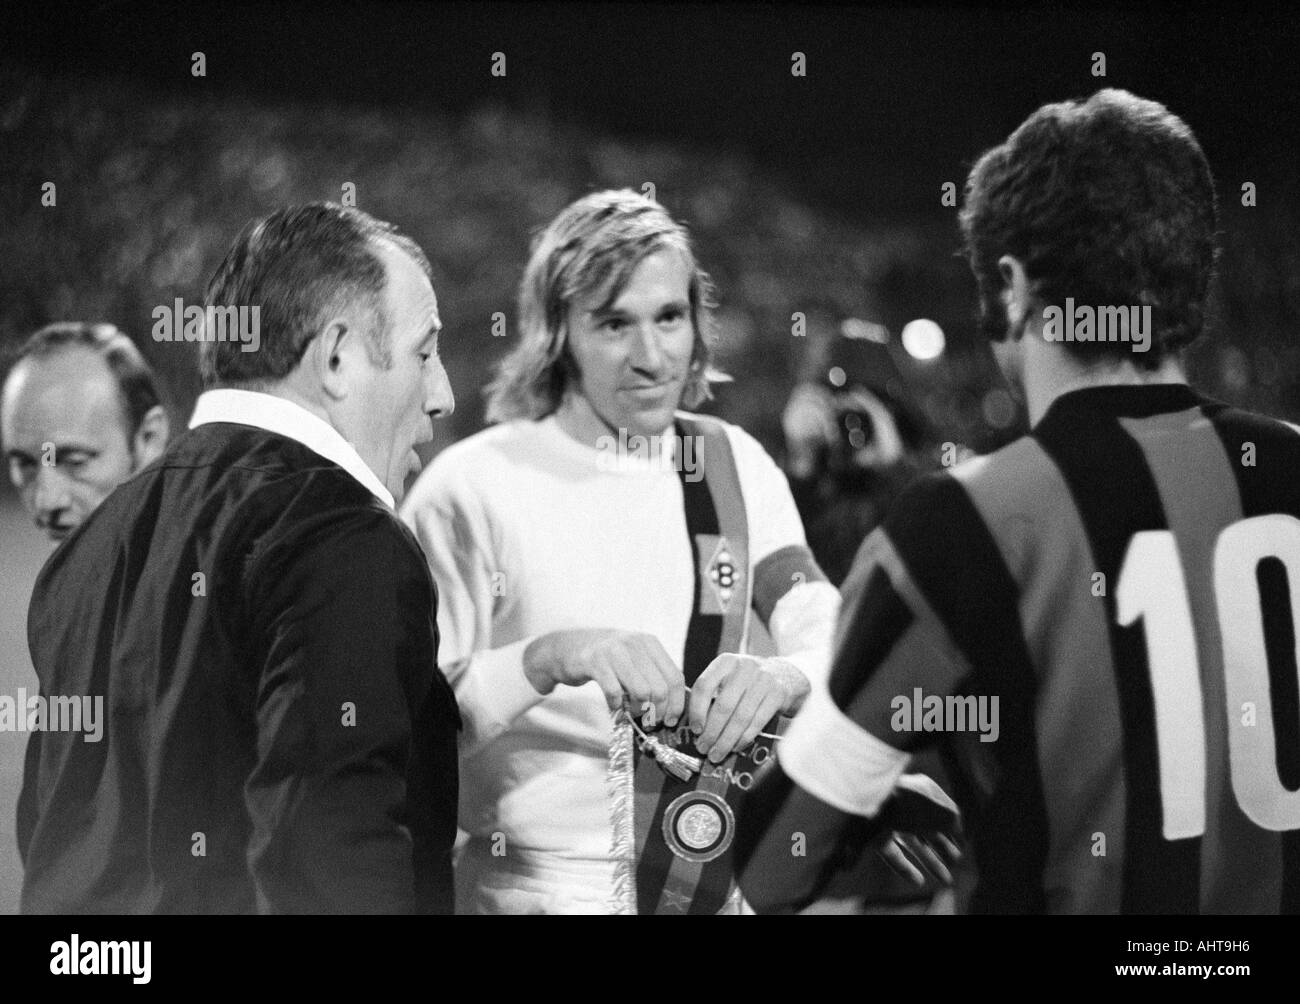 football, European Cup, 1971/1972, eighth final, first leg, Borussia Moenchengladbach versus Inter Mailand 7:1, Boekelberg Stadium in Moenchengladbach, toss-up and welcome, team captains Guenter Netzer (MG, middle) and Sandro Mazzola (Milan, 10), left ref Stock Photo